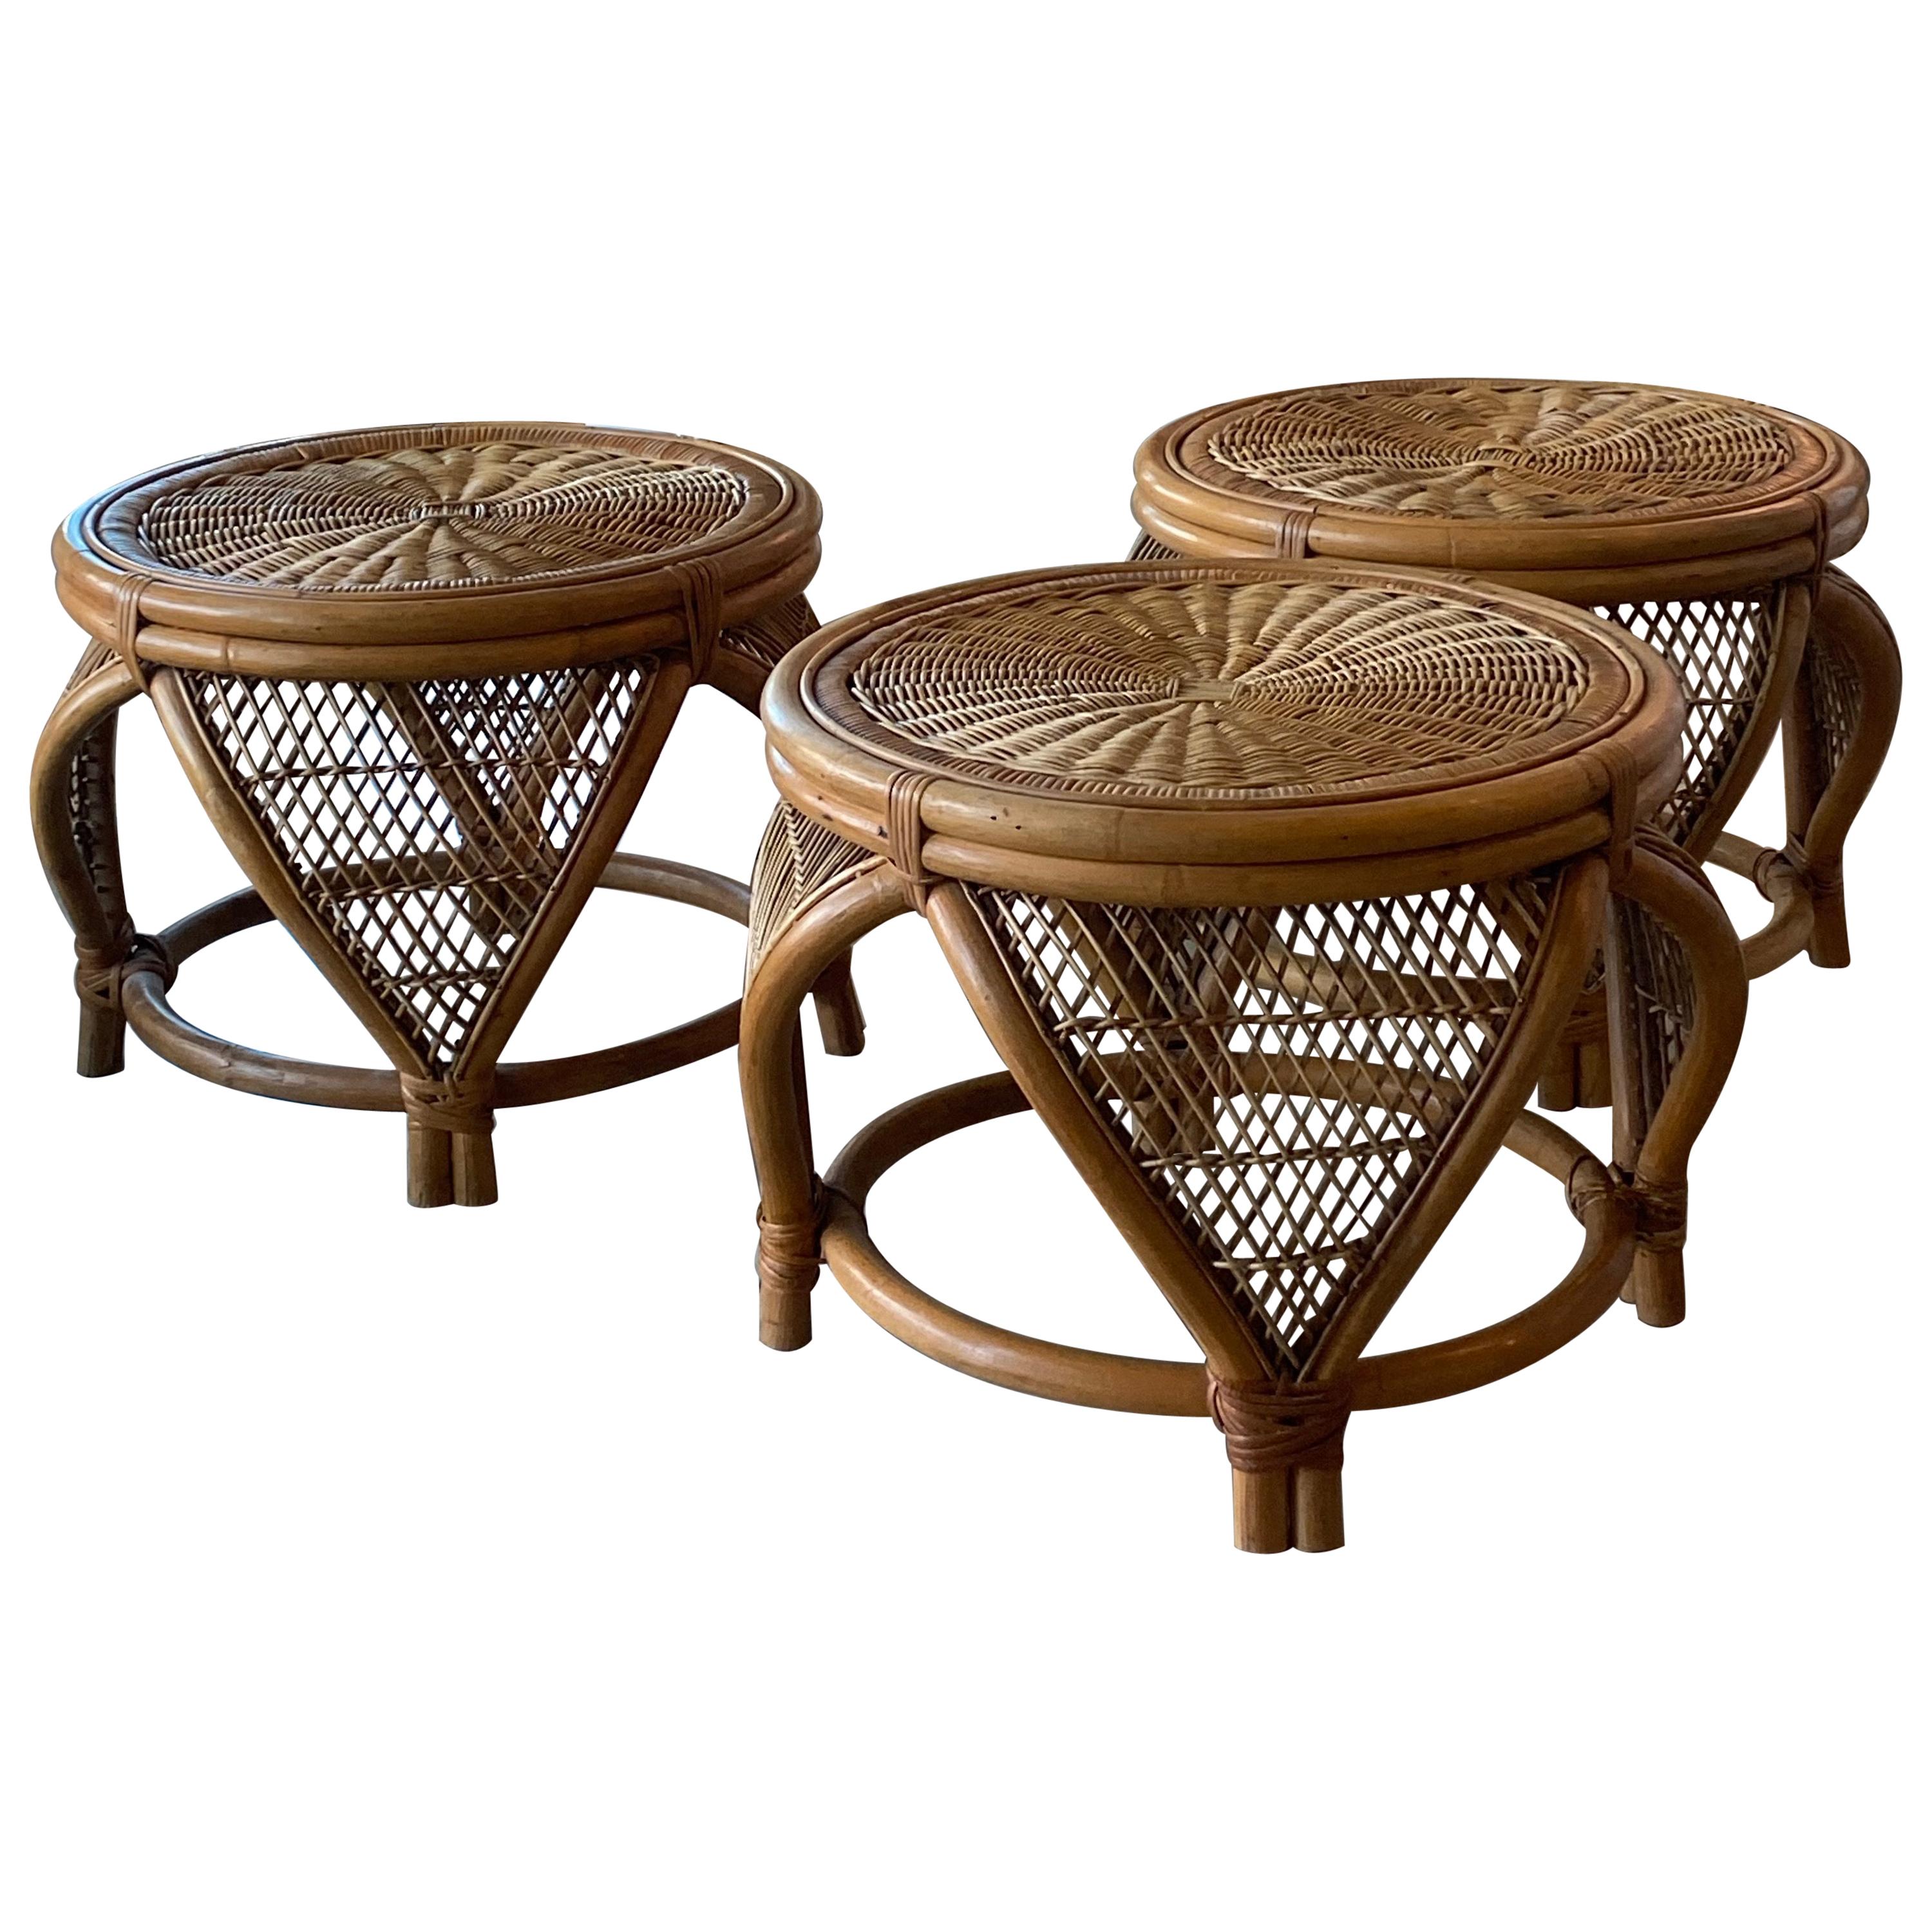 Vintage Set of 3 Rattan & Wicker Moroccan Stools Benches Ottomans Footstools